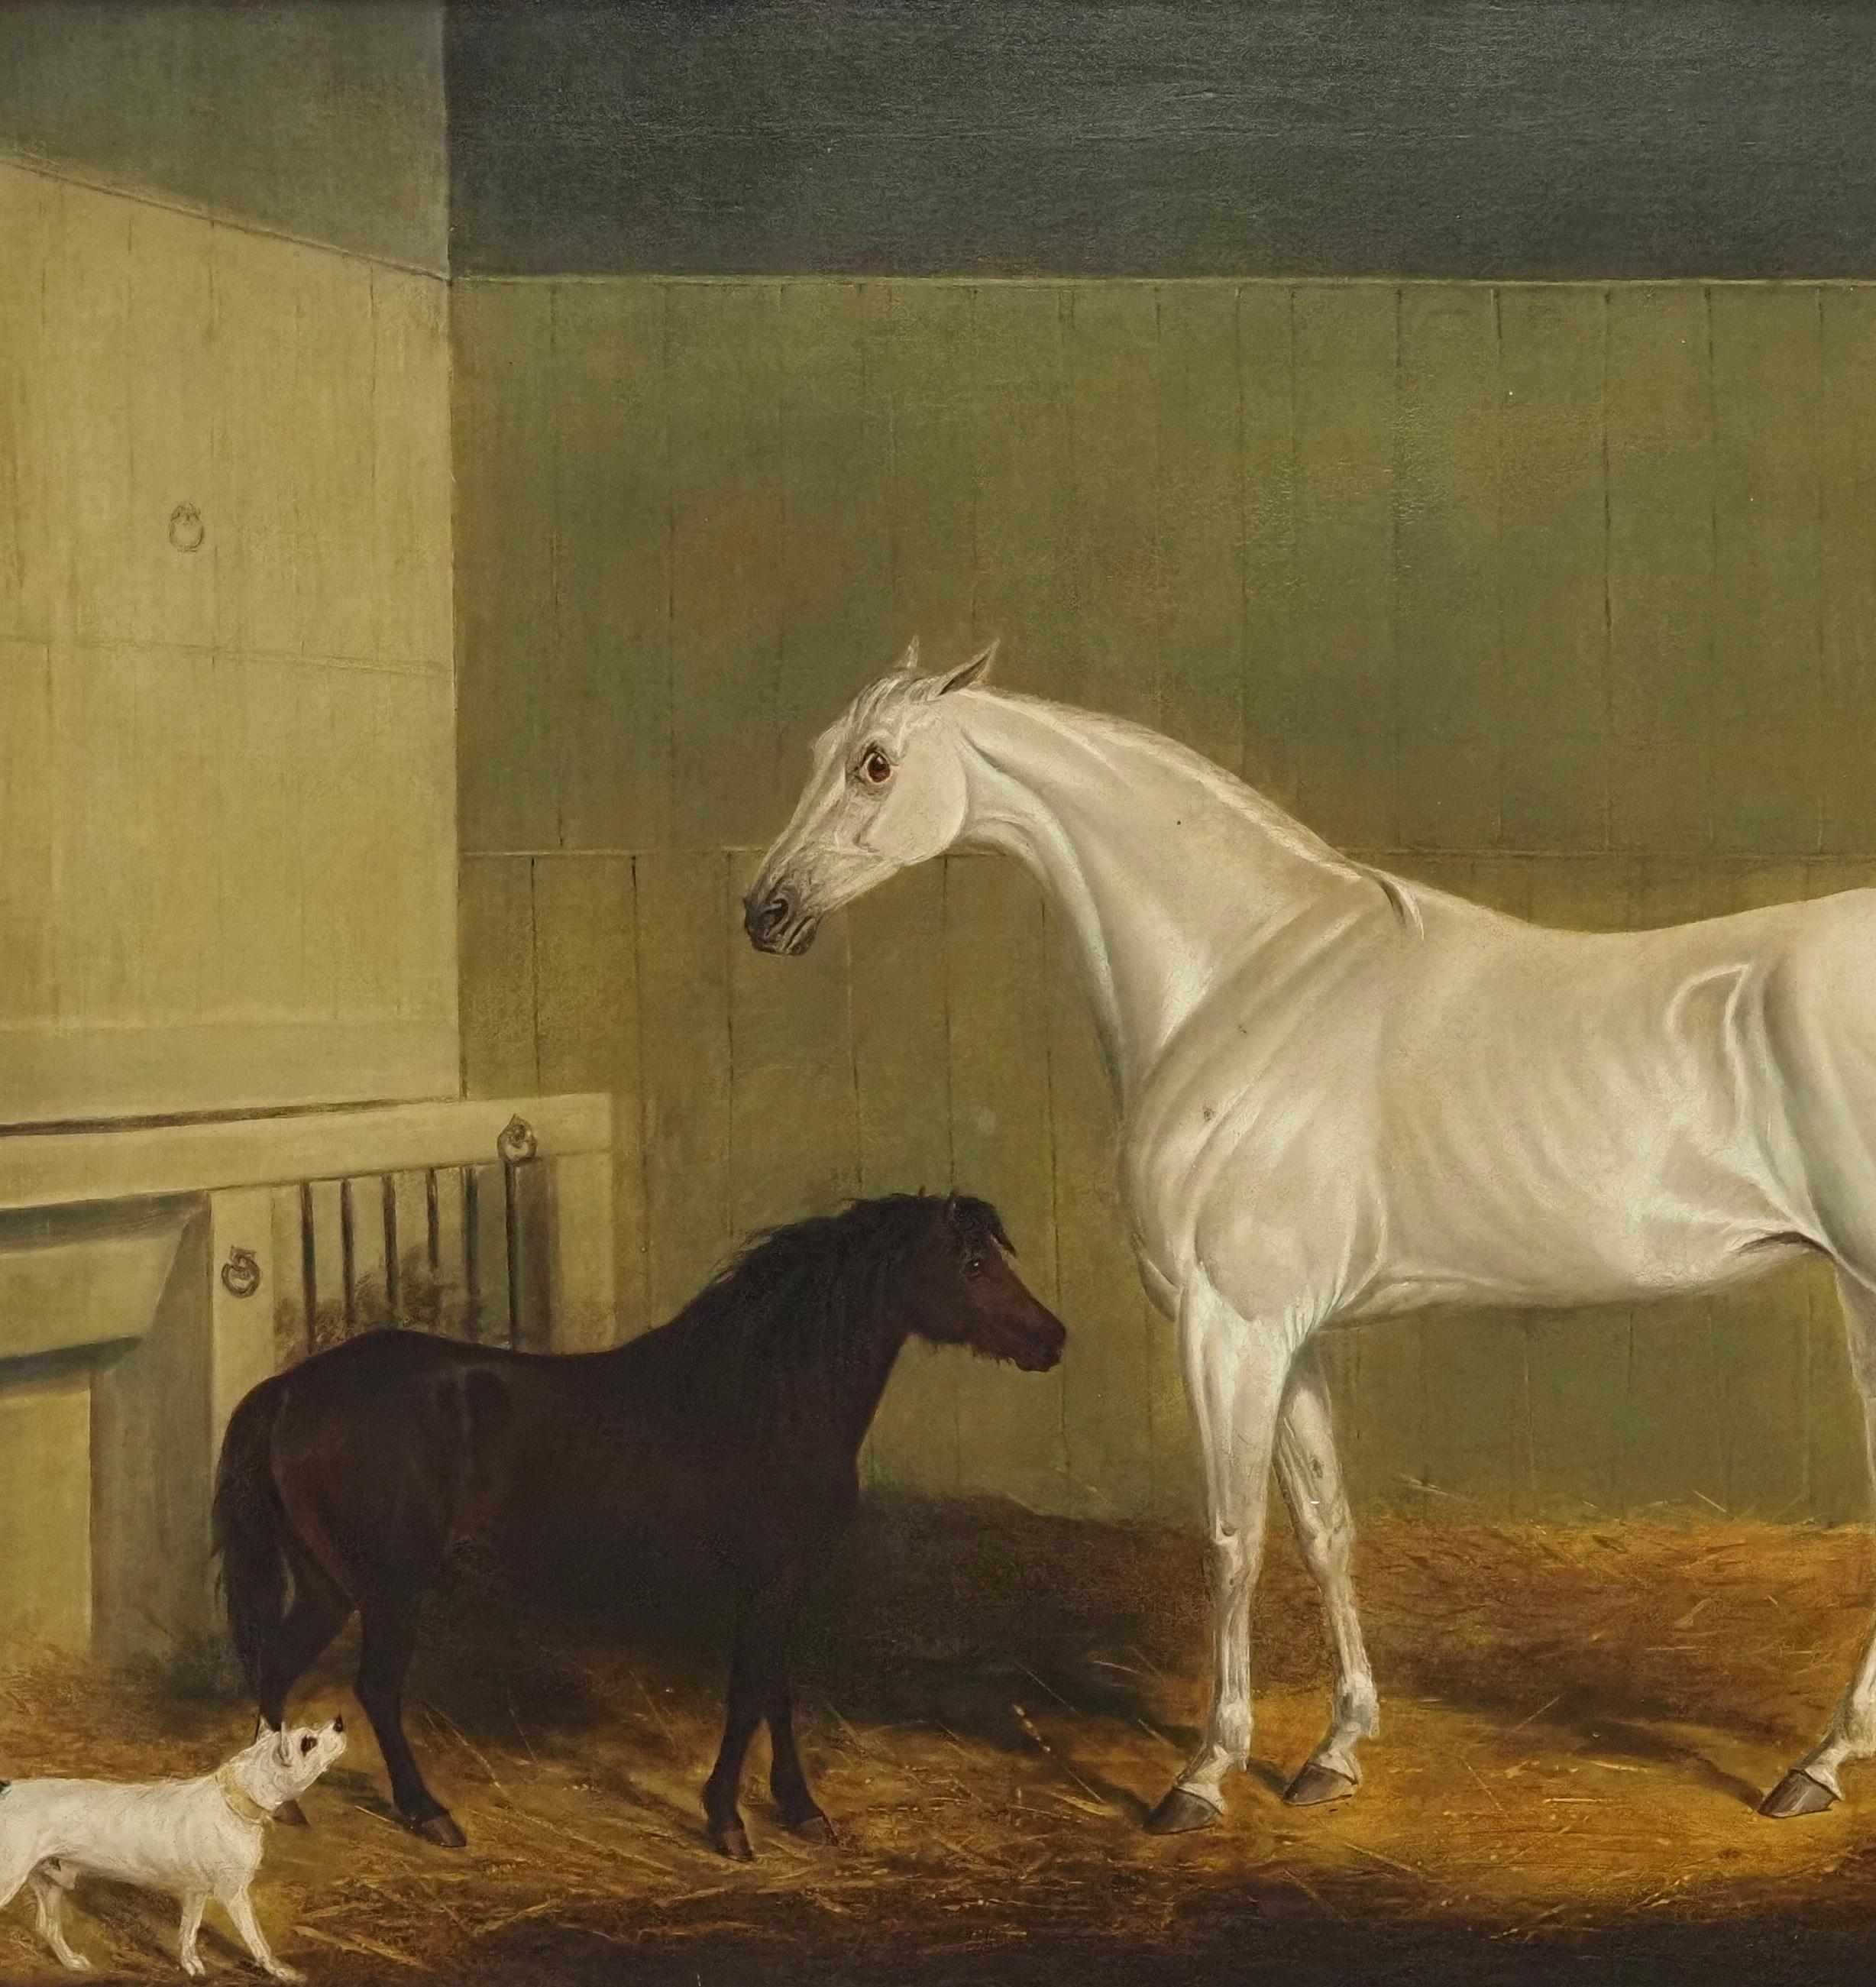 James Loder of Bath (1784-1854)
A grey horse, pony and terrier in a stable
signed 'J Loder' (lower right)
Oil on canvas
Canvas size - 24 x 30 in
Framed size - 27 x 34 in

Provenance
With Arthur Ackermann, London.

James Loder of Bath, born in 1784,